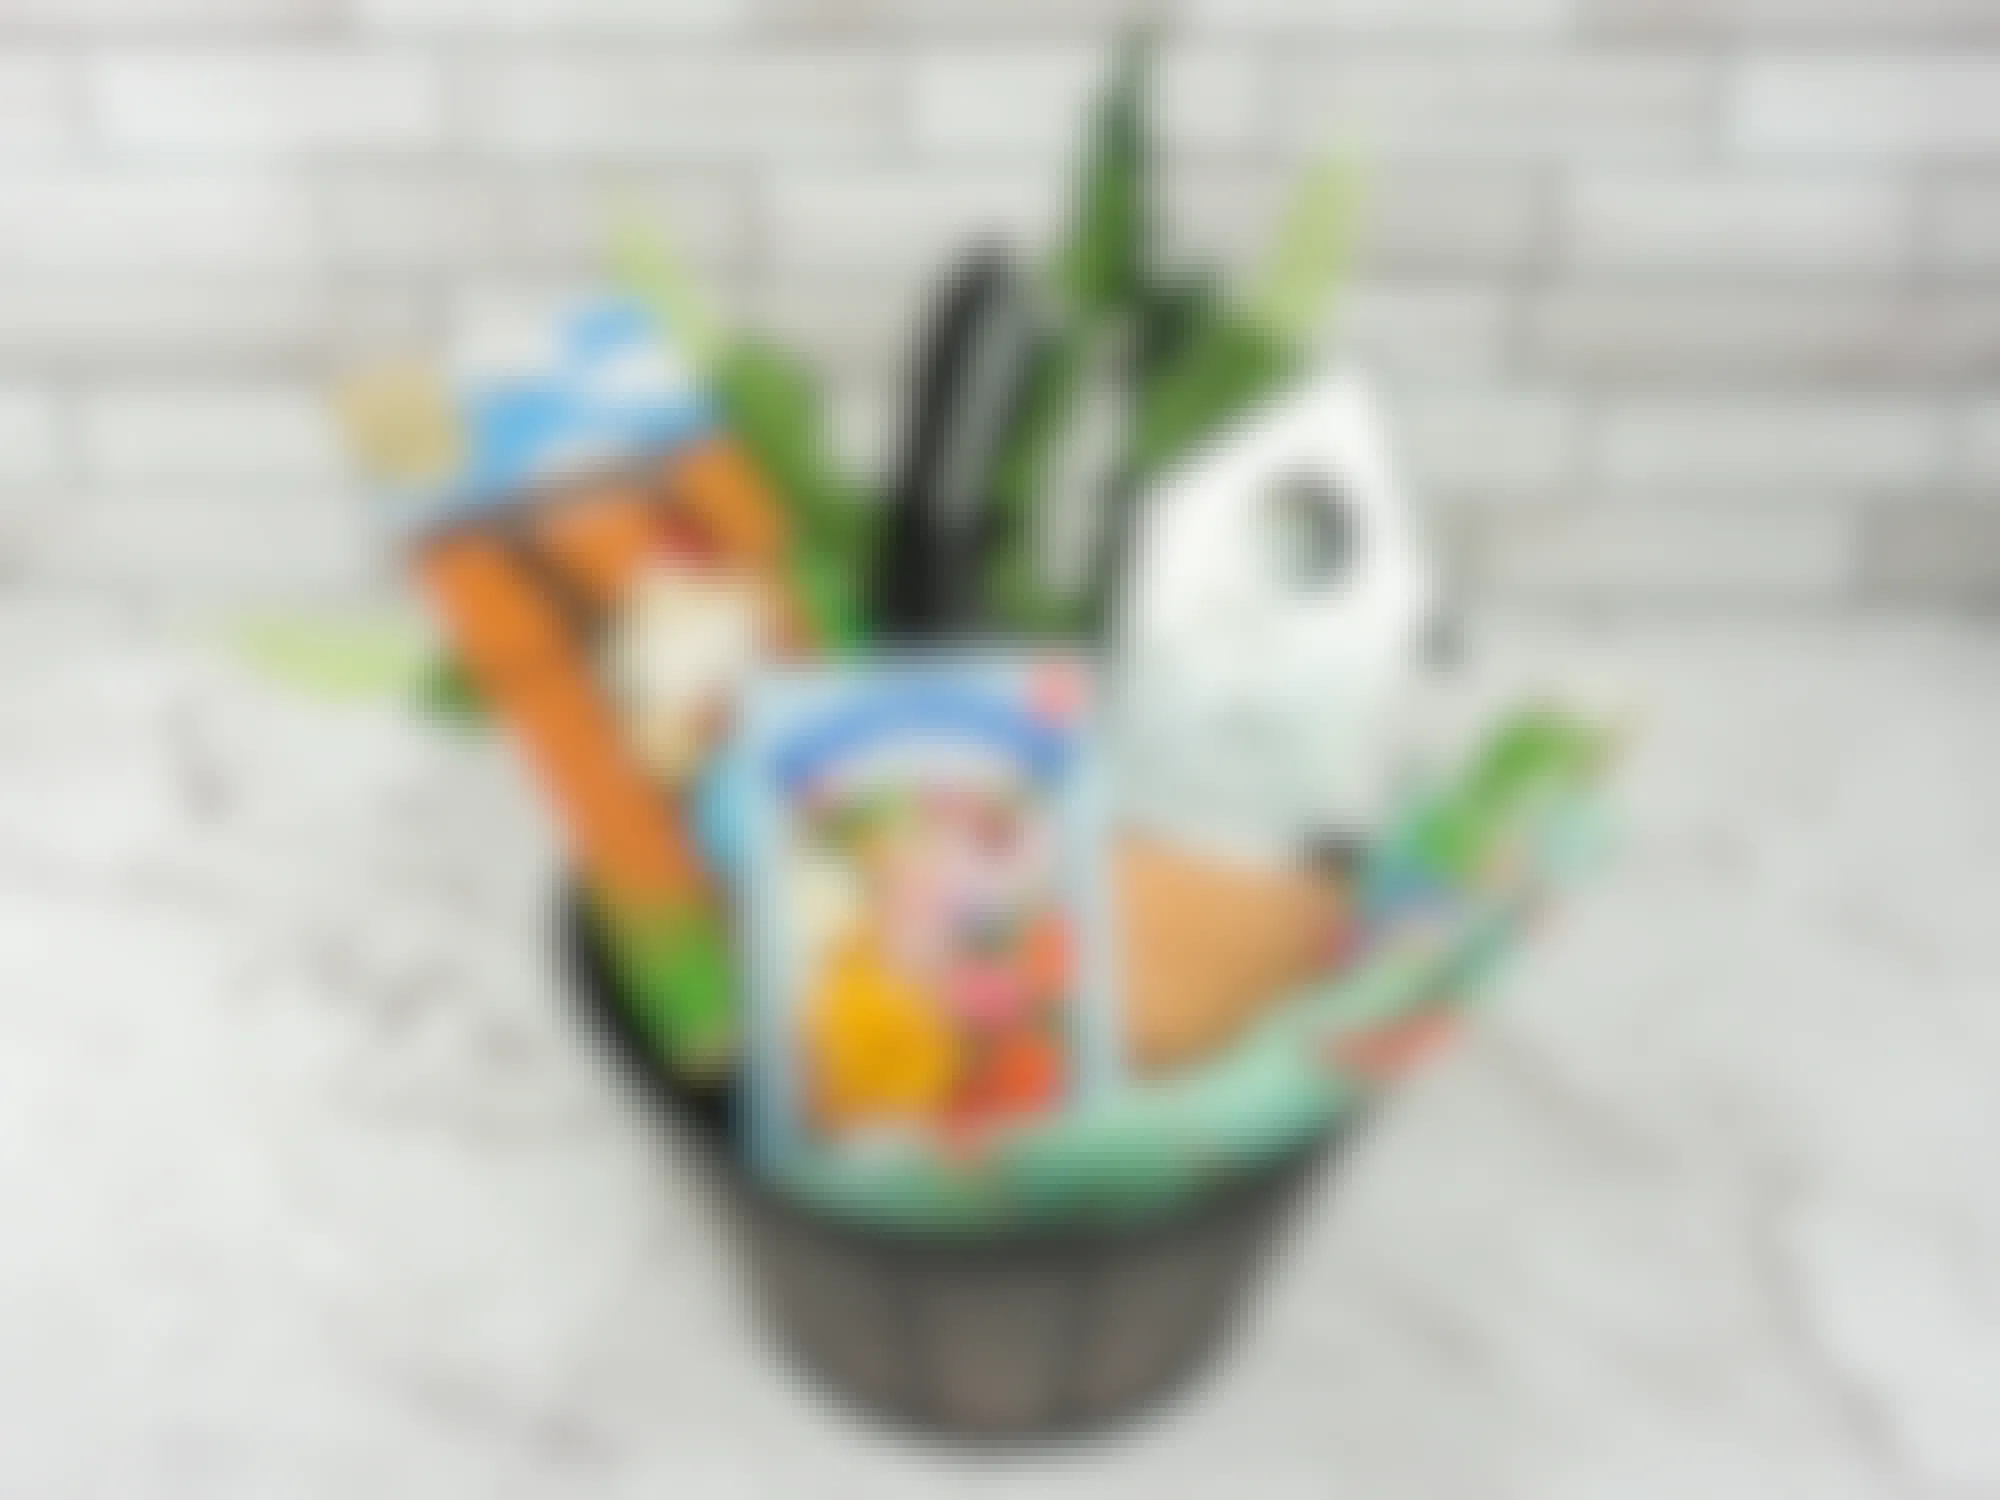 A gardening gift basket with a planter as the basket, and fake plants, gardening gloves, a trowel, some small pots, a little bird house, some seeds, and a gnome planter hugger inside